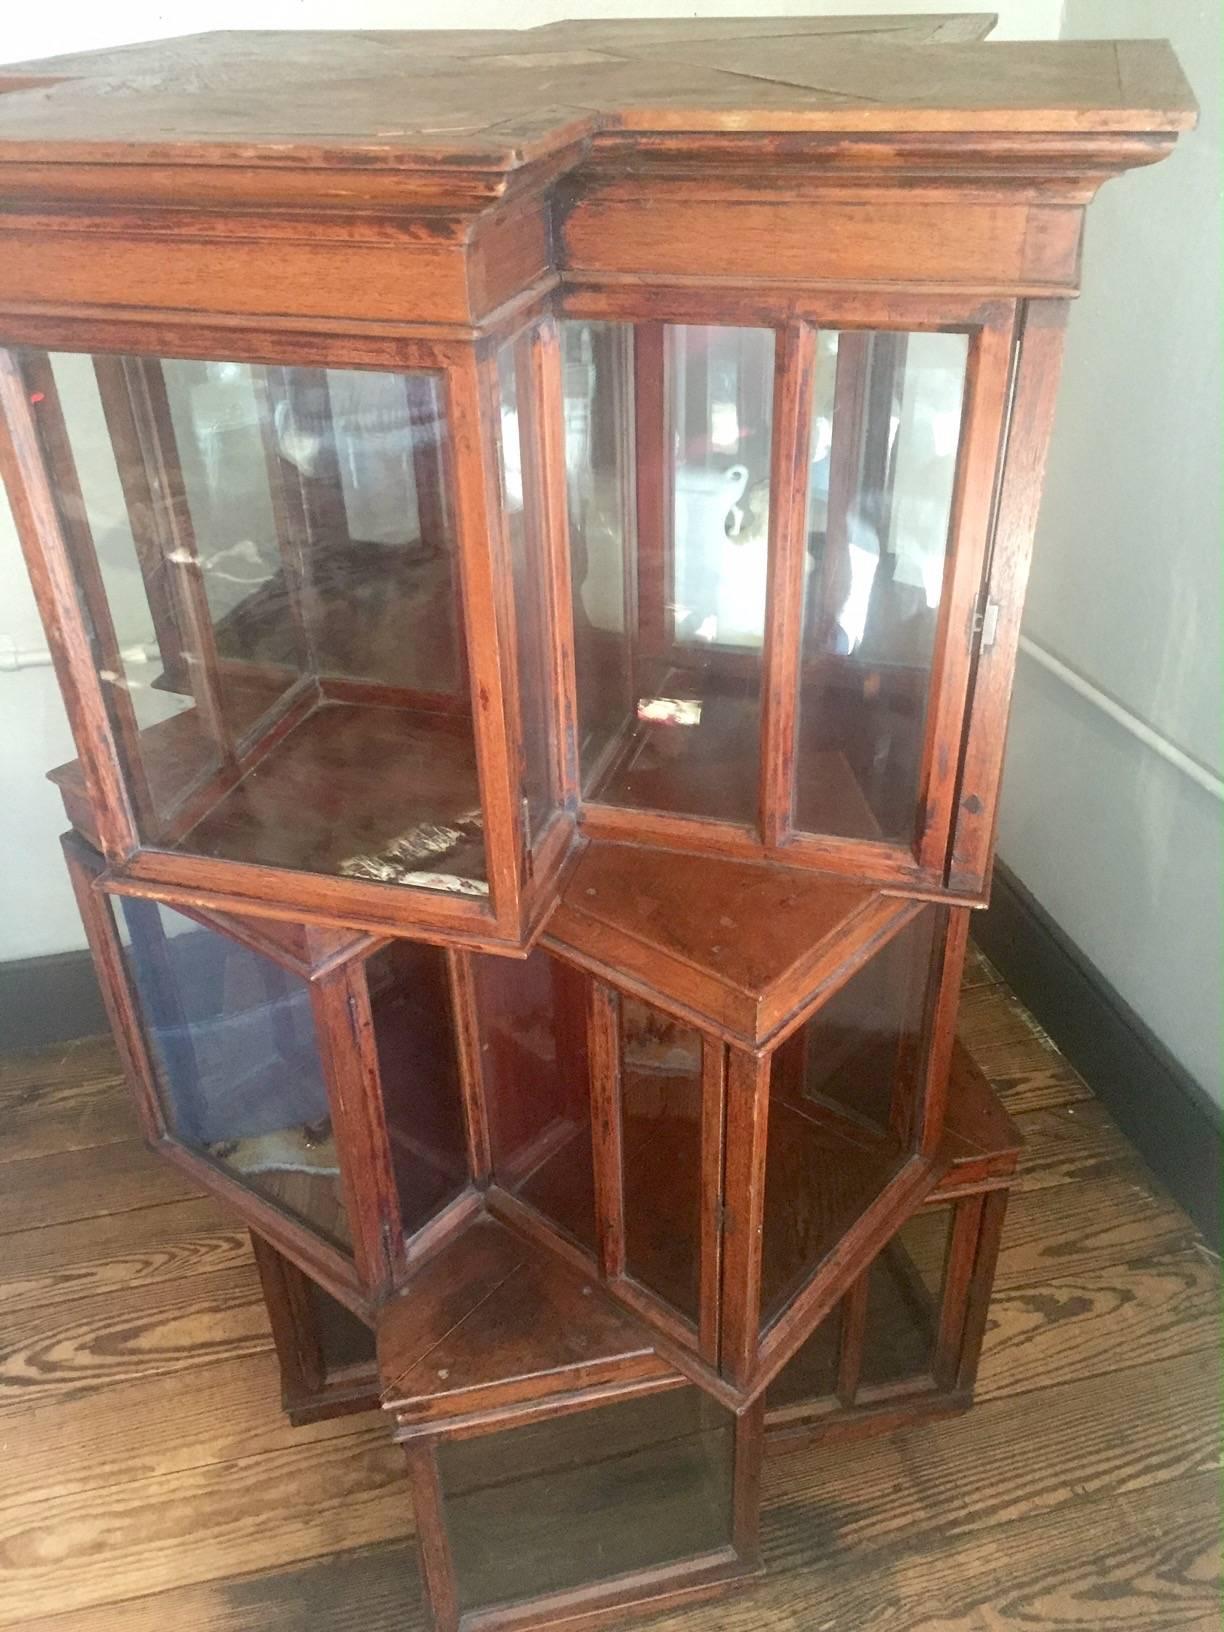 Very Unusual Antique Revolving Wood and Glass Bibliophile 1